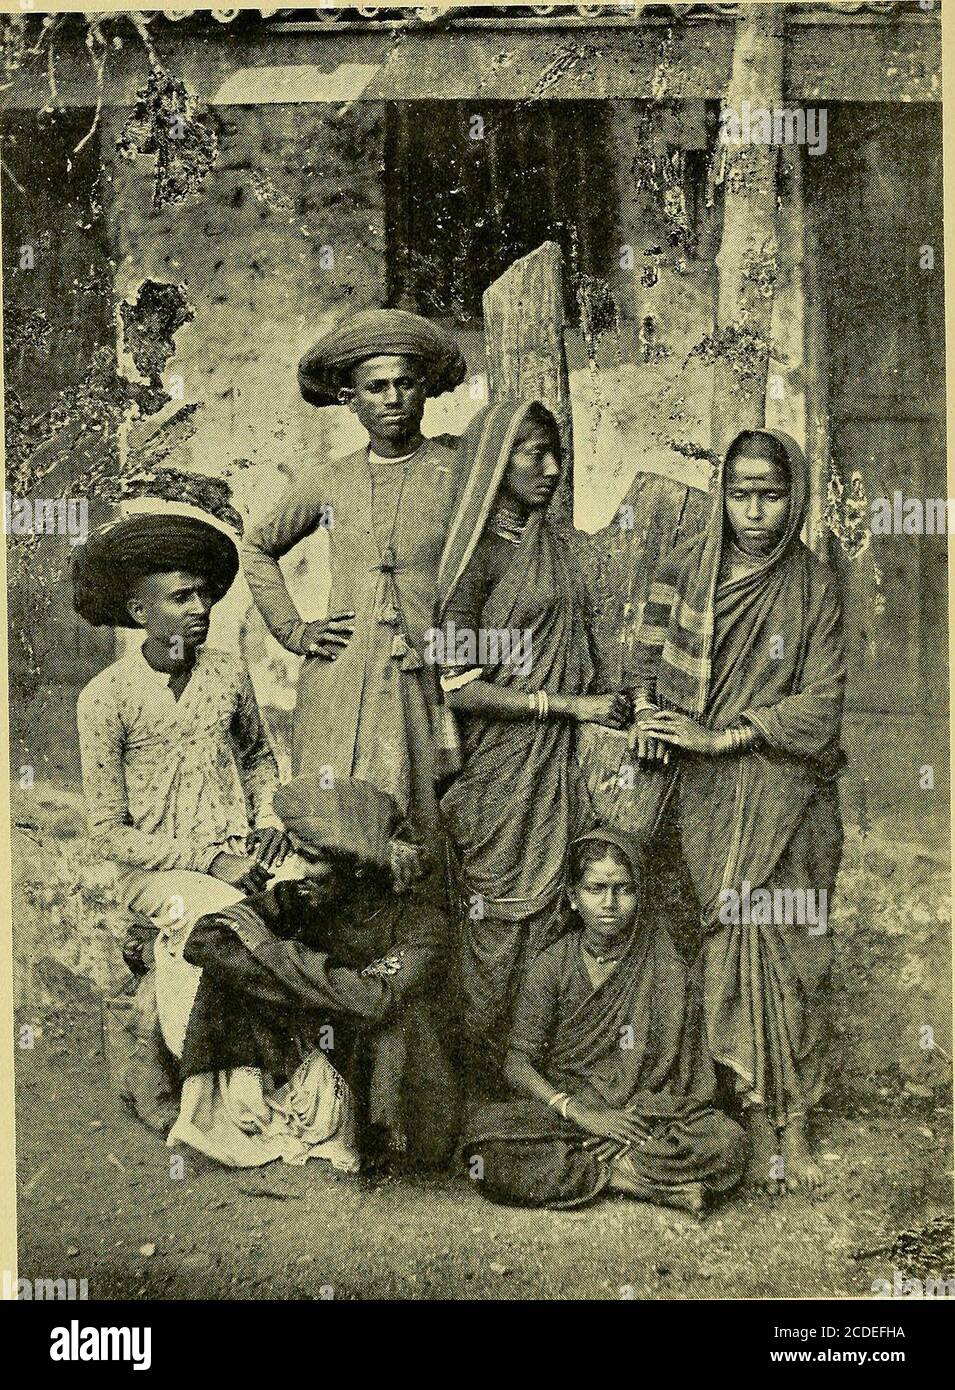 . Indian life in town and country . A GROUP OF BRAHMINS INDIAN LIFEIN TOWN ANDCOUNTRY % k By Herbert Compton author of a free lance in a far land, akings hussar, etc. ILLUSTRATED G. P. PUTNAMS SONSNEW YORK AND LONDON Zbc 1knicfterl)oc??ec ptcee1904 ^s UBffss-V «f OON0RESSTwo OoDies Reraived SEP 20 1904oOooyrffht Emtry CLASS ^ XXe. Na ^ COPY B Copyright, 1904 BY G. P. PUTNAMS SONS Published, September, 1904 Ube Iftnfcfterbocfter ffTress, Wew l^orft CONTENTS Nativk Indian I/IFe: CHAPTER I PAGE India as It Is . 3 CHAPTER IICastb 17 CHAPTER IIIManners and Customs 36 CHAPTER IVFrom Ryots to Rajahs Stock Photo